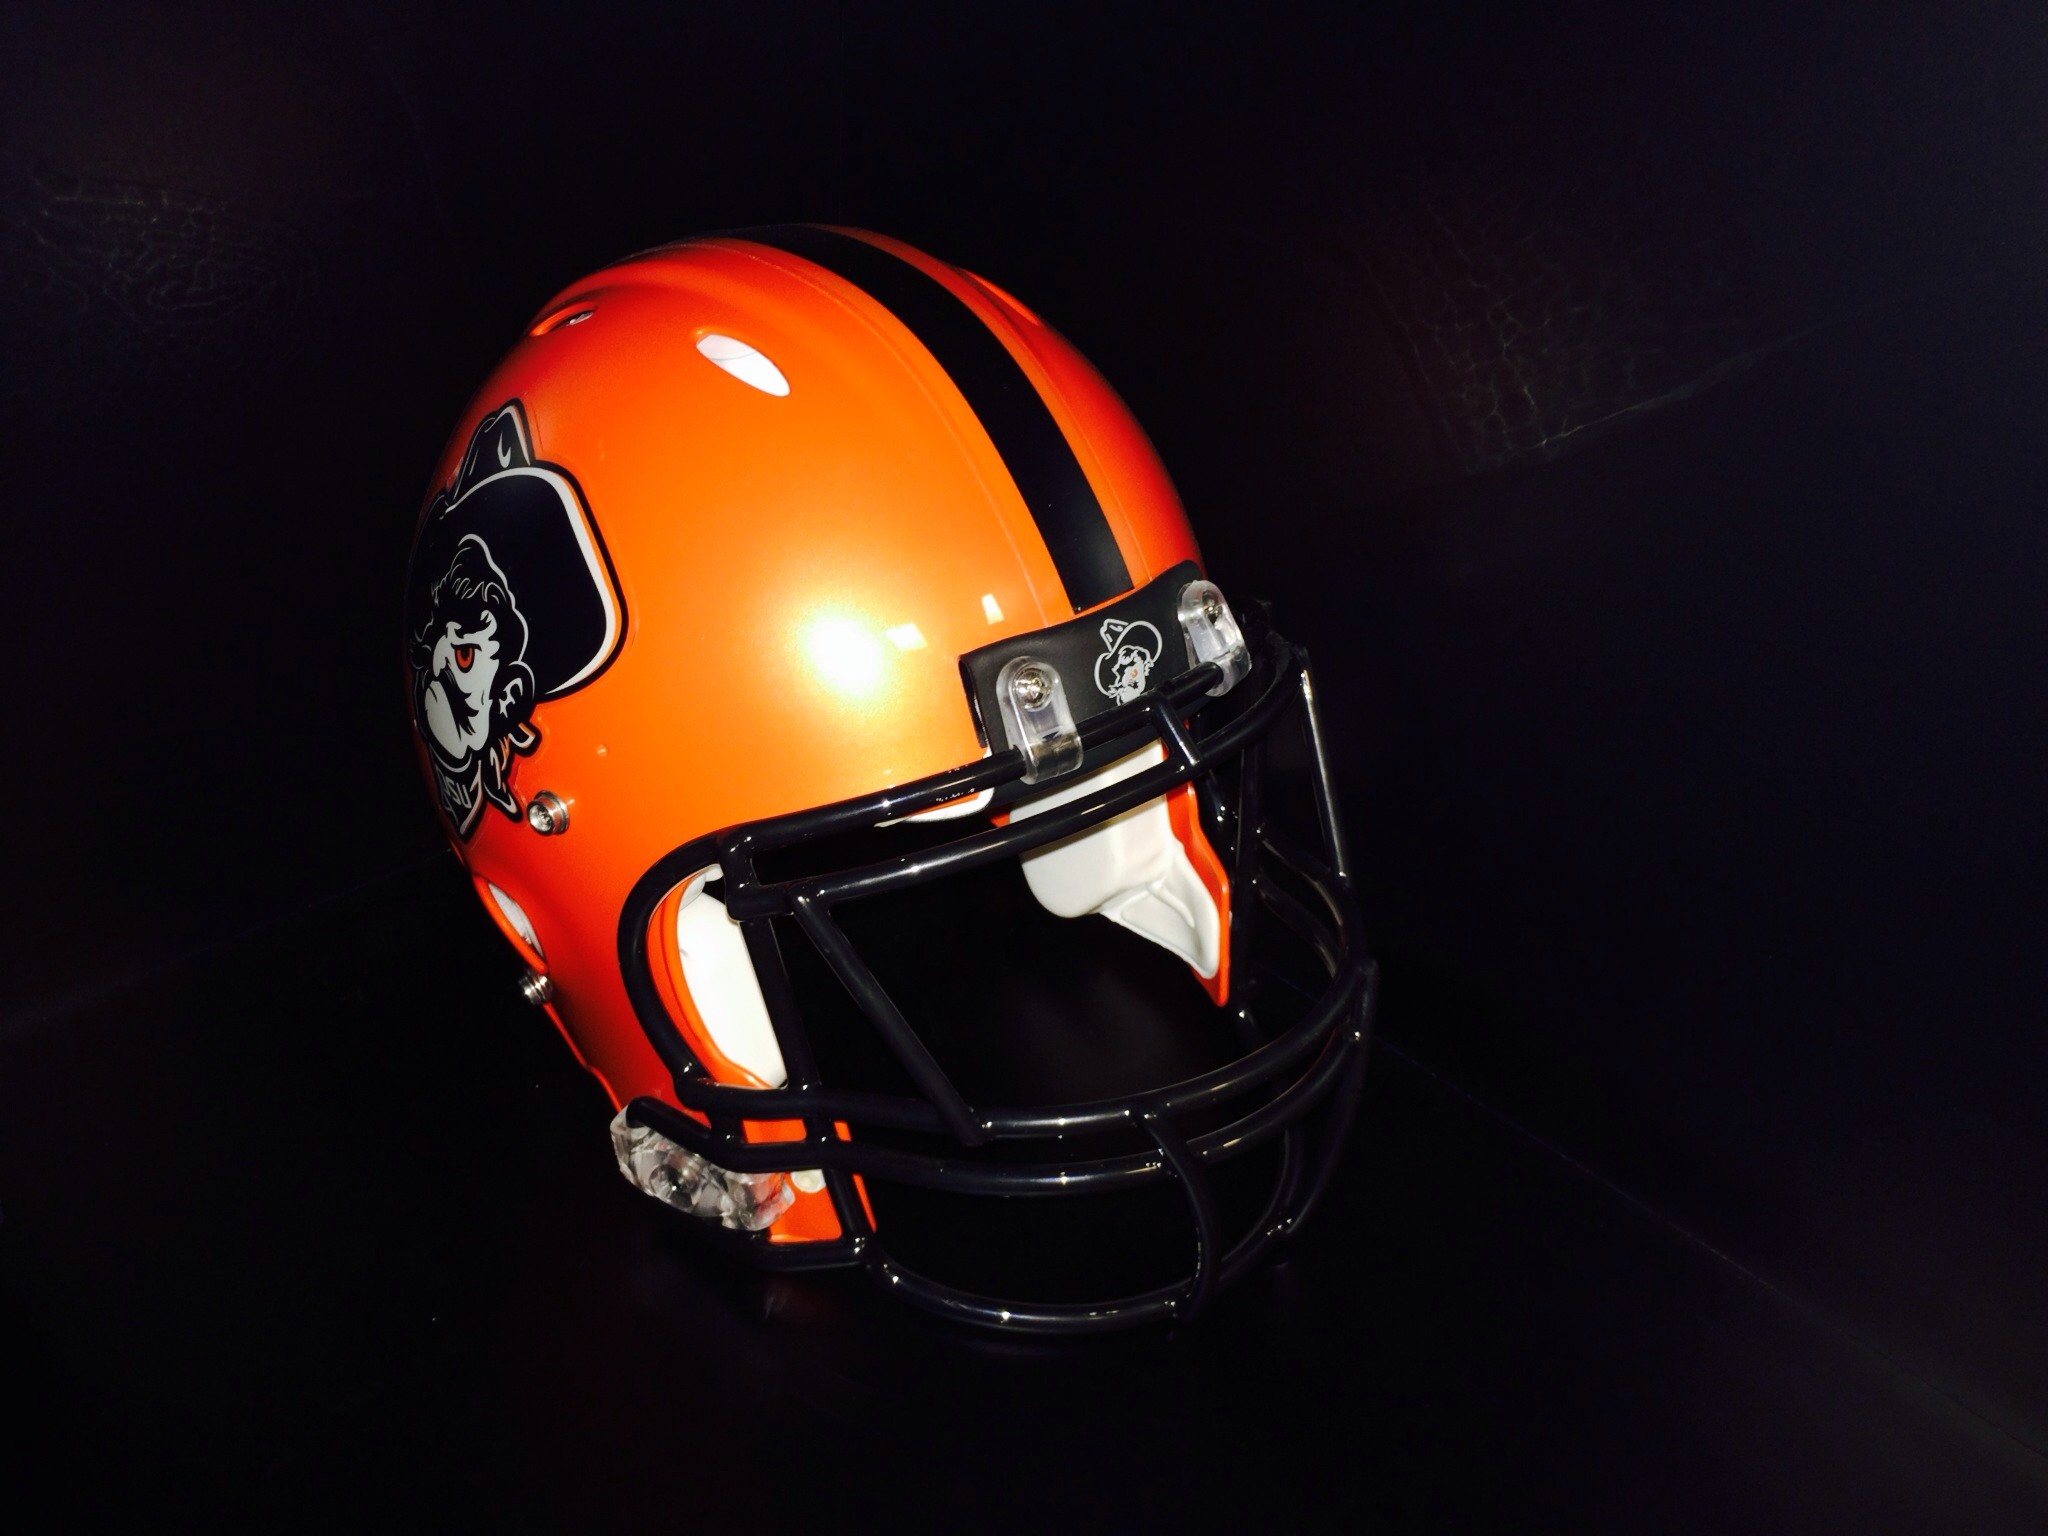 2048x1536 Incredible Oklahoma State Concept Helmets & Teasers - Cowboys Ride For Free